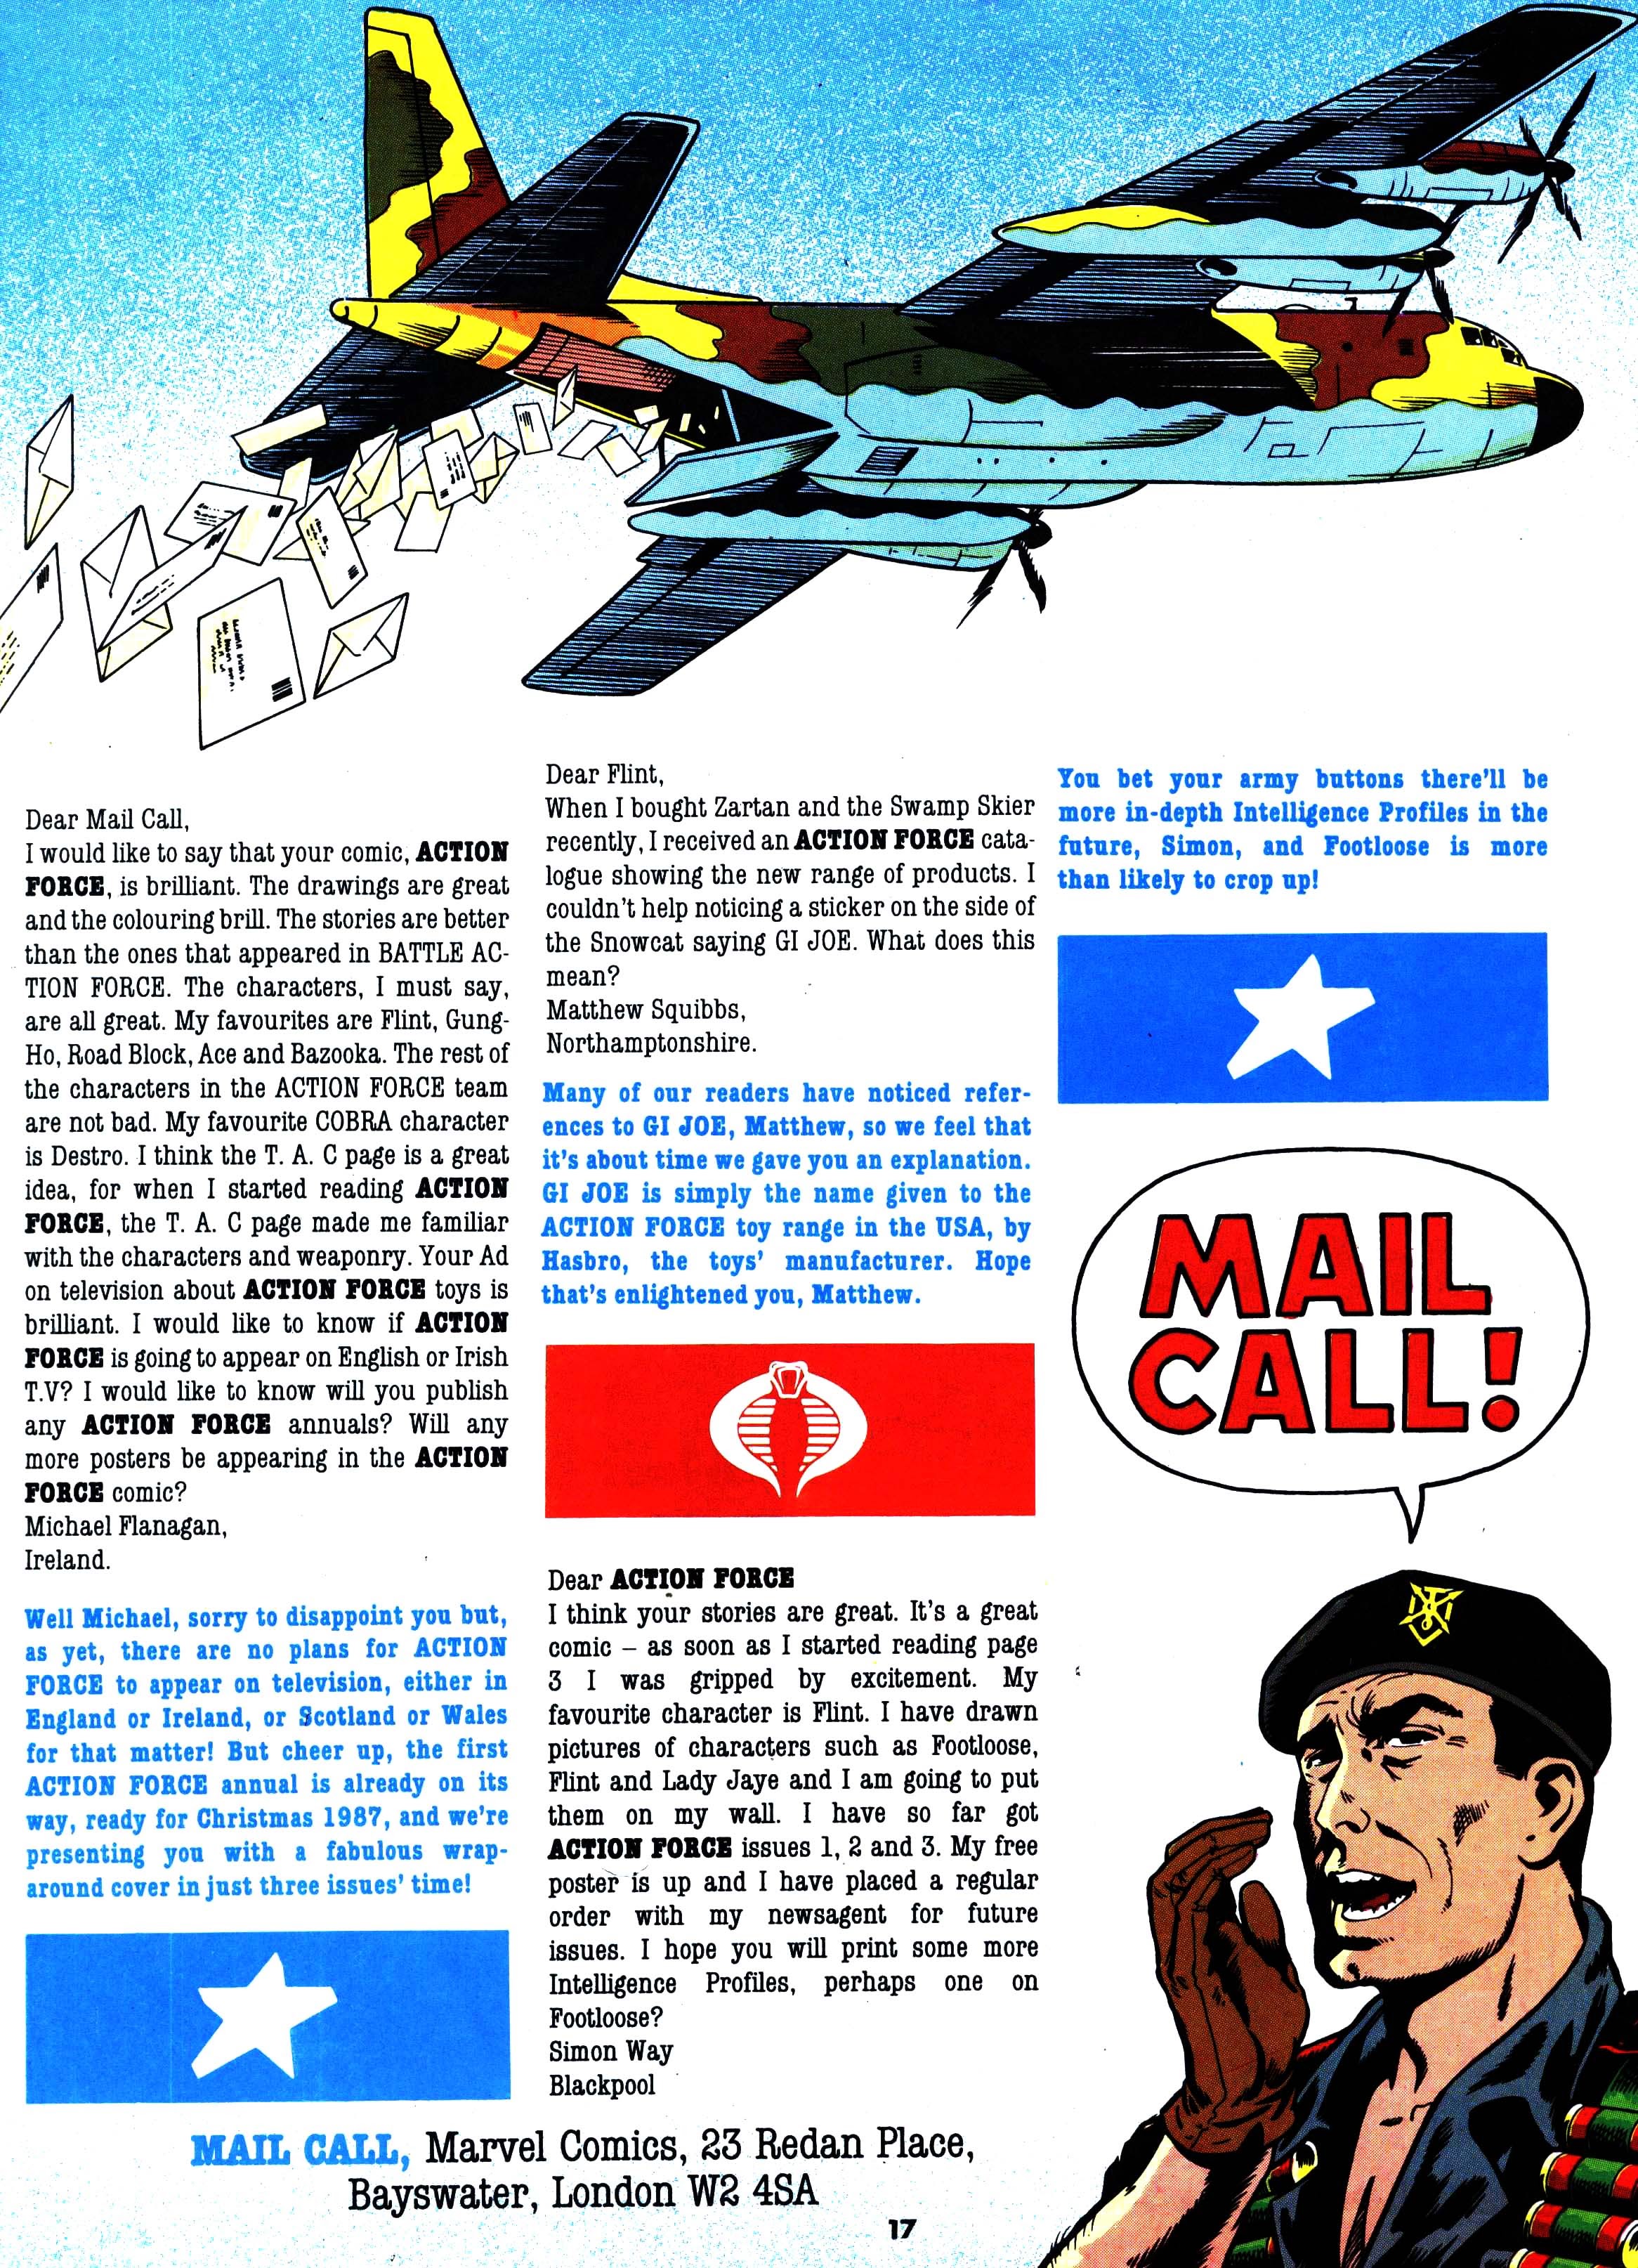 Read online Action Force comic -  Issue #15 - 17